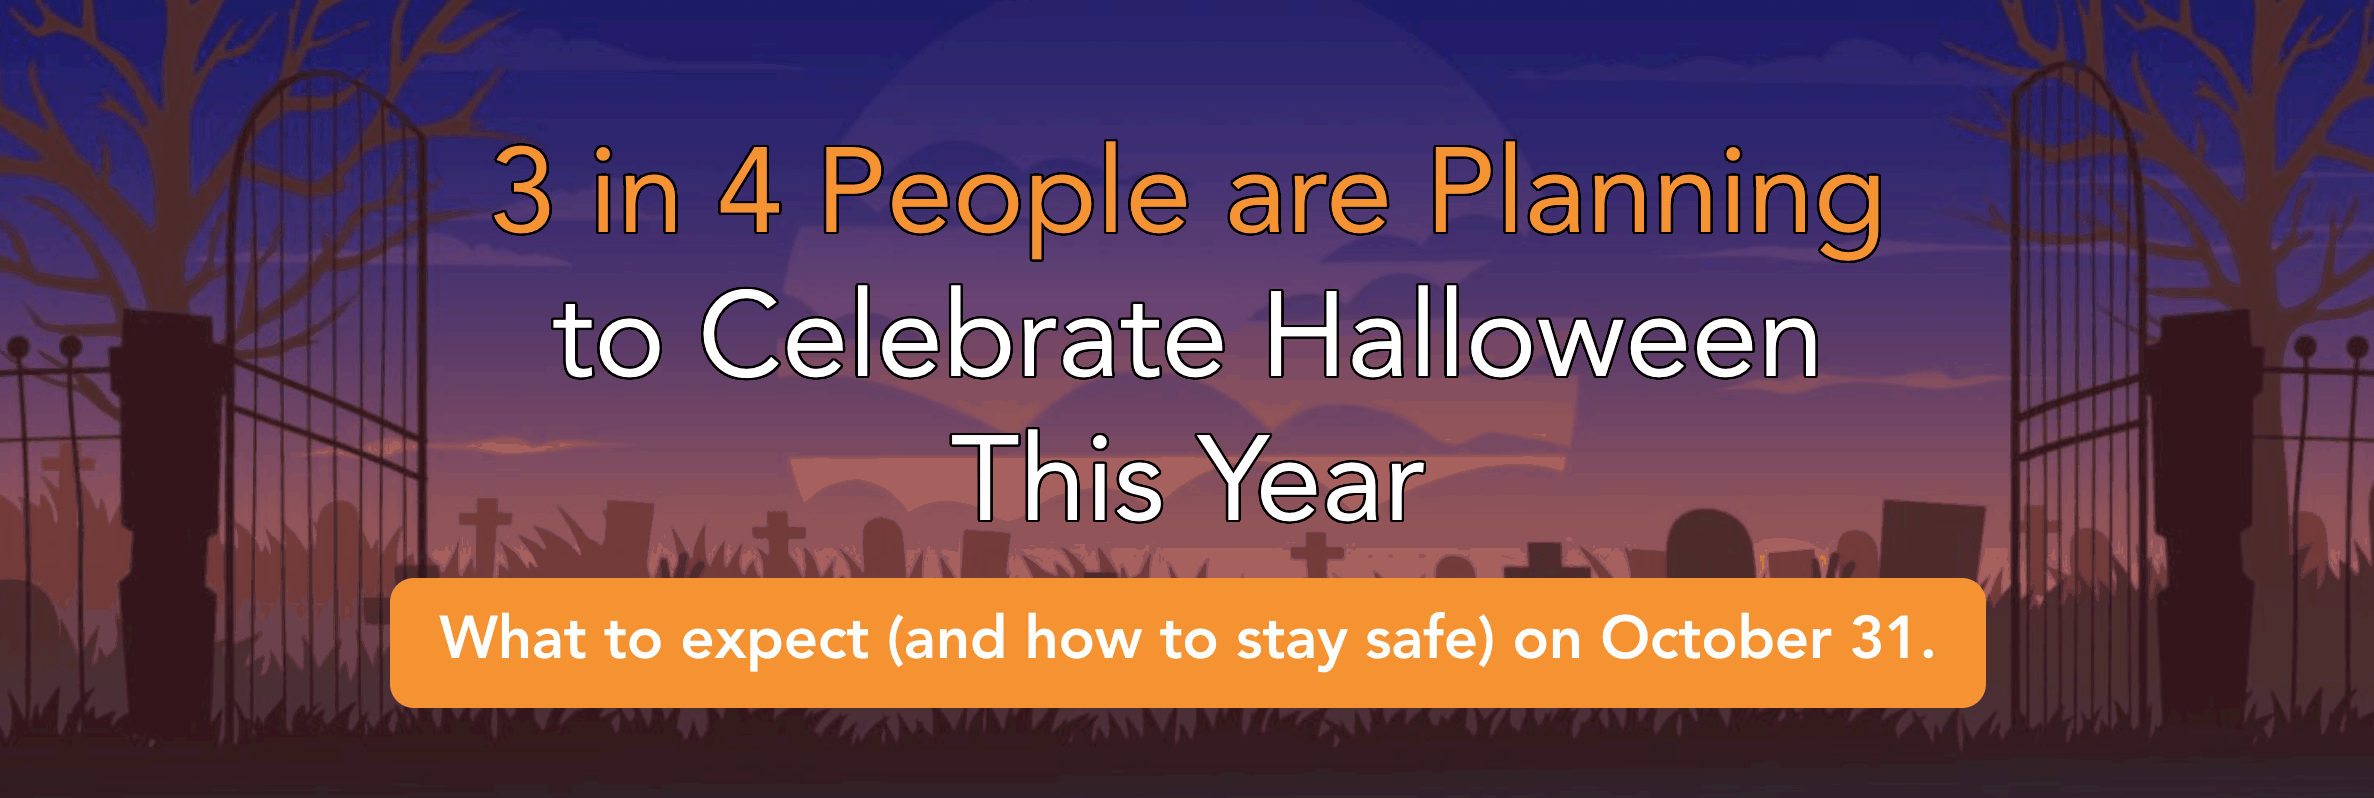 3 in 4 People are Planning to Celebrate Halloween This Year Featured Image